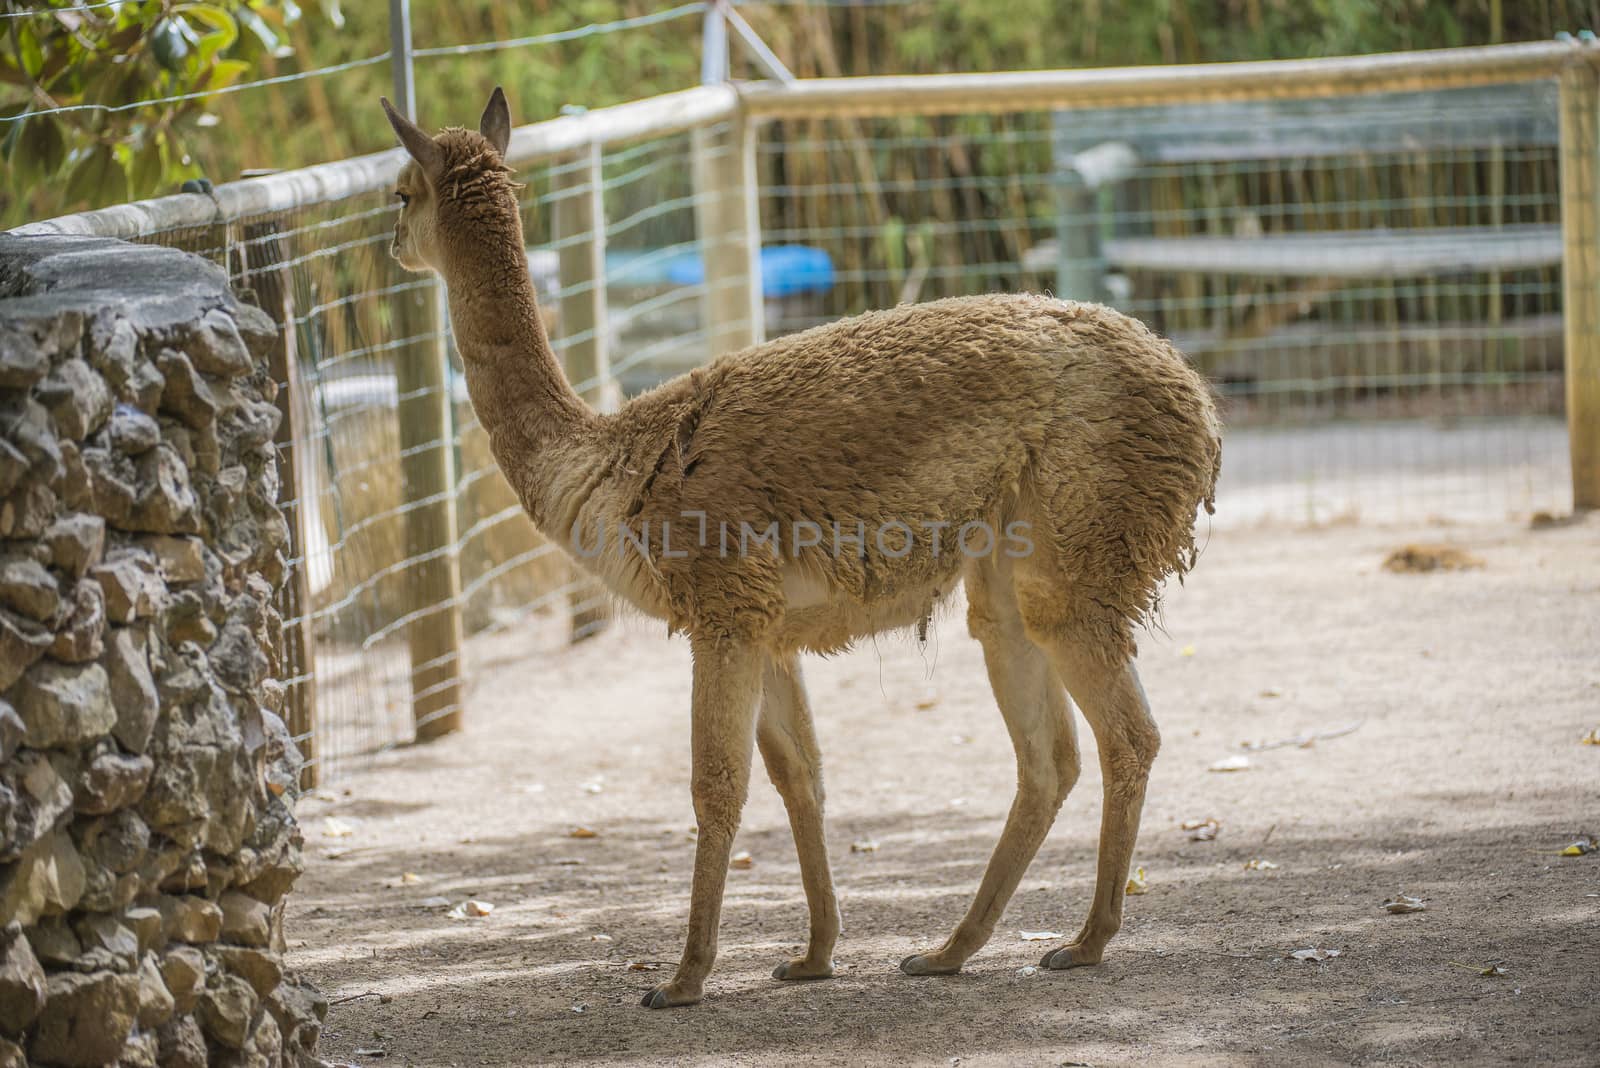 The llama is a South American camelids, widely used as a meat and pack animal. Photo is shot 27/07/2013.